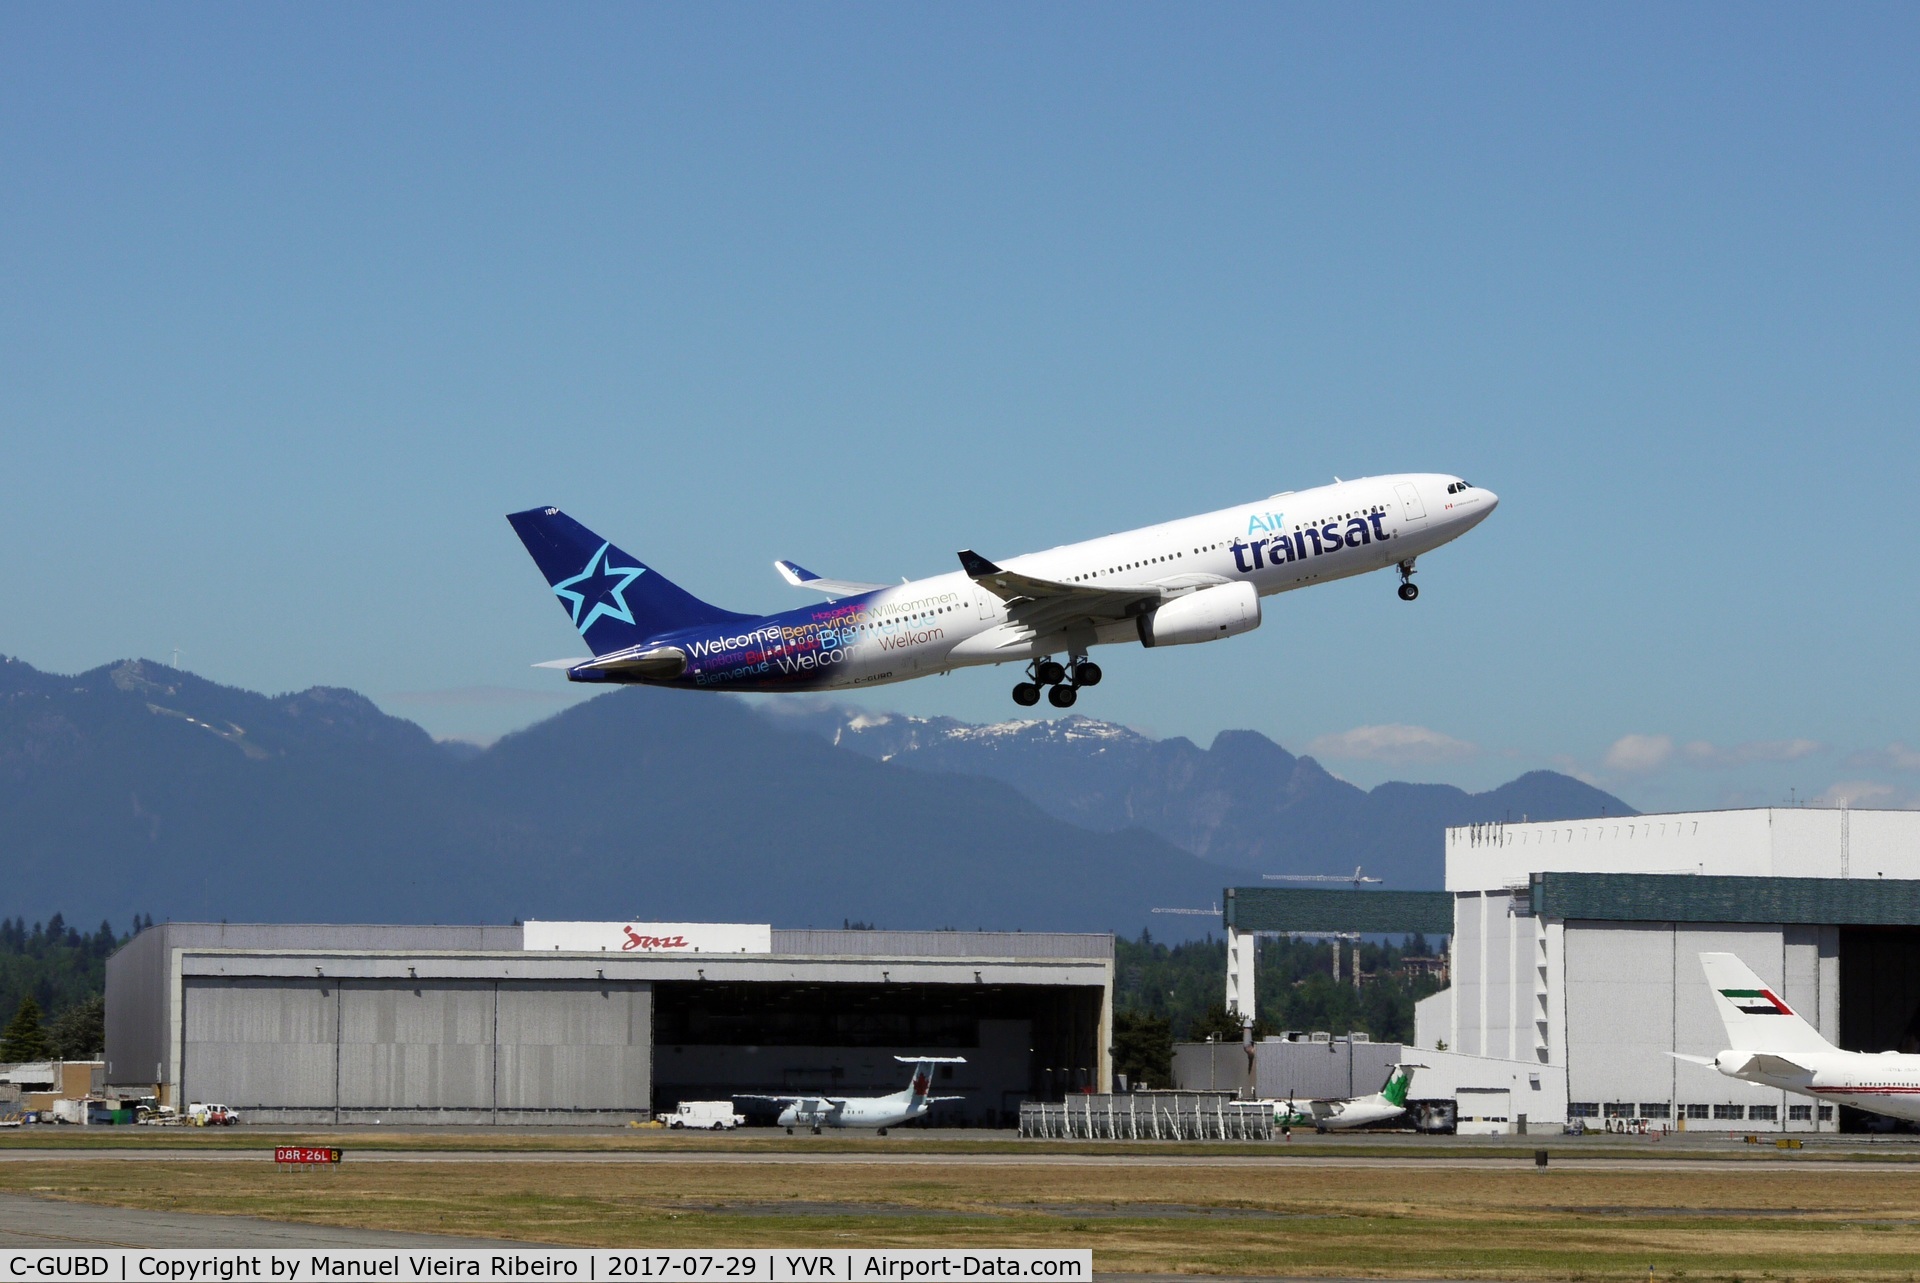 C-GUBD, 2003 Airbus A330-243 C/N 536, Departure from YVR